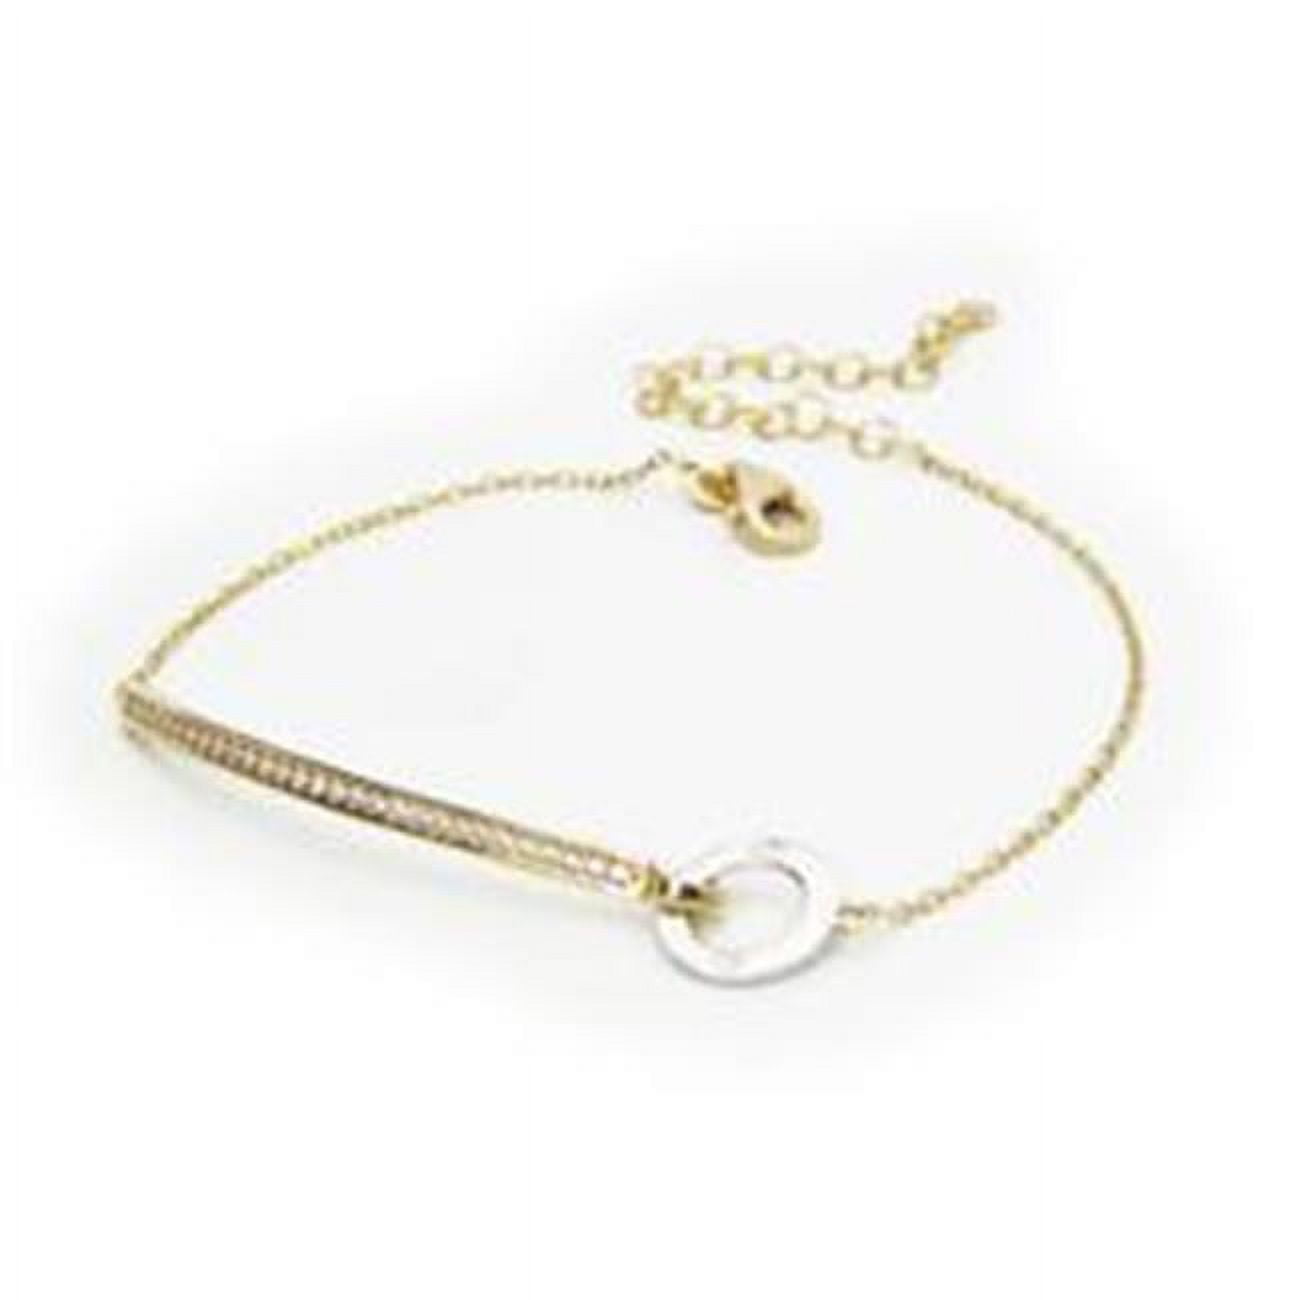 6.5 In. Plus 2 In. Extension Sterling Gold Plated Silver Cubic Zirconia Bar Thin Bracelet With Circle